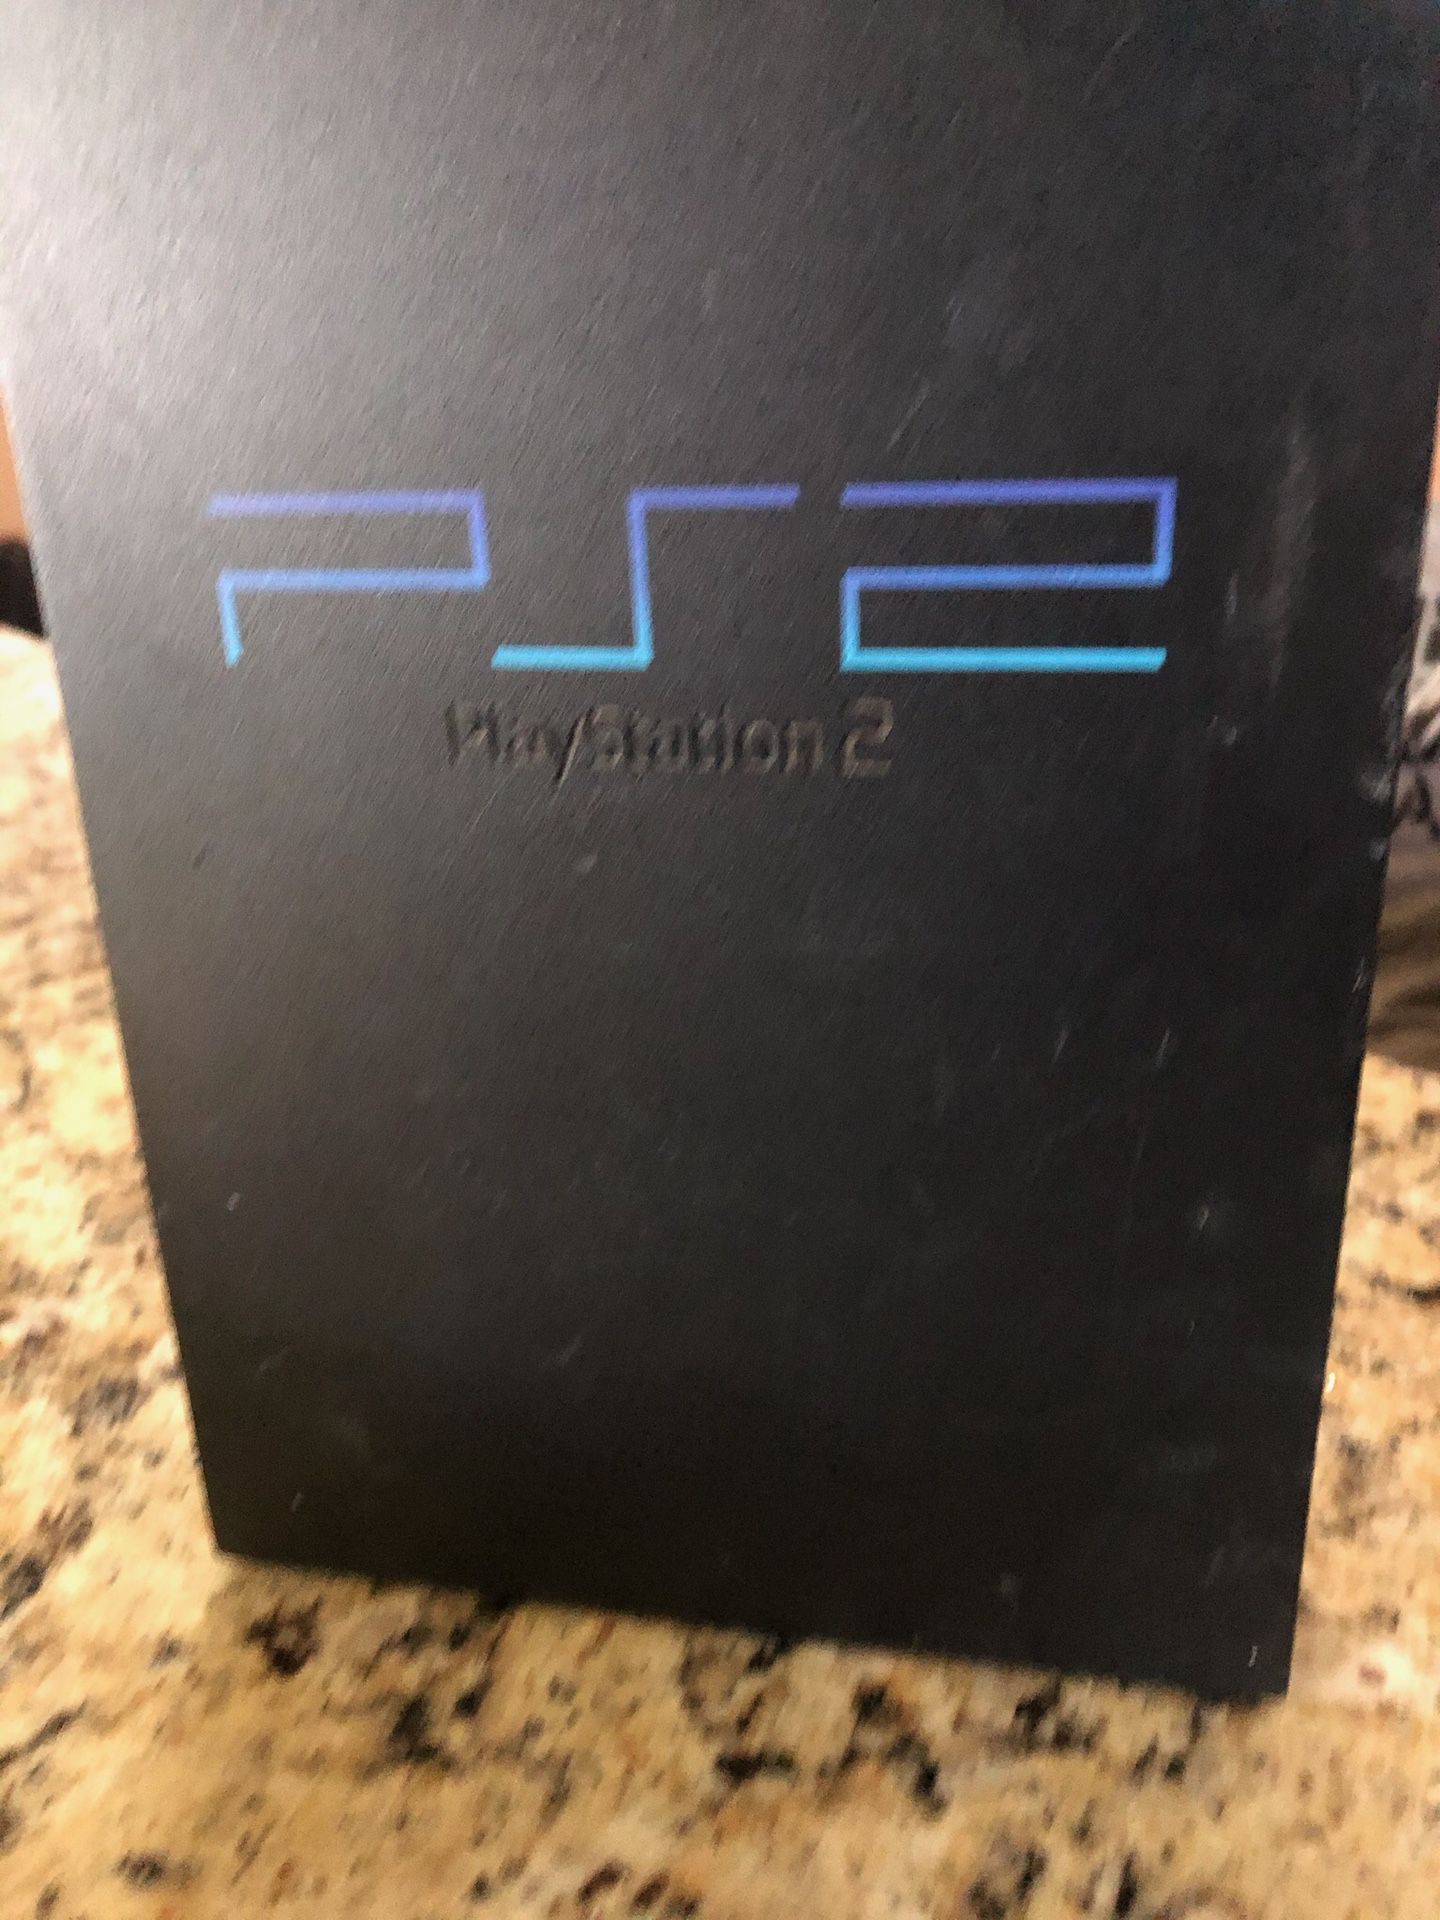 Ps 2 console